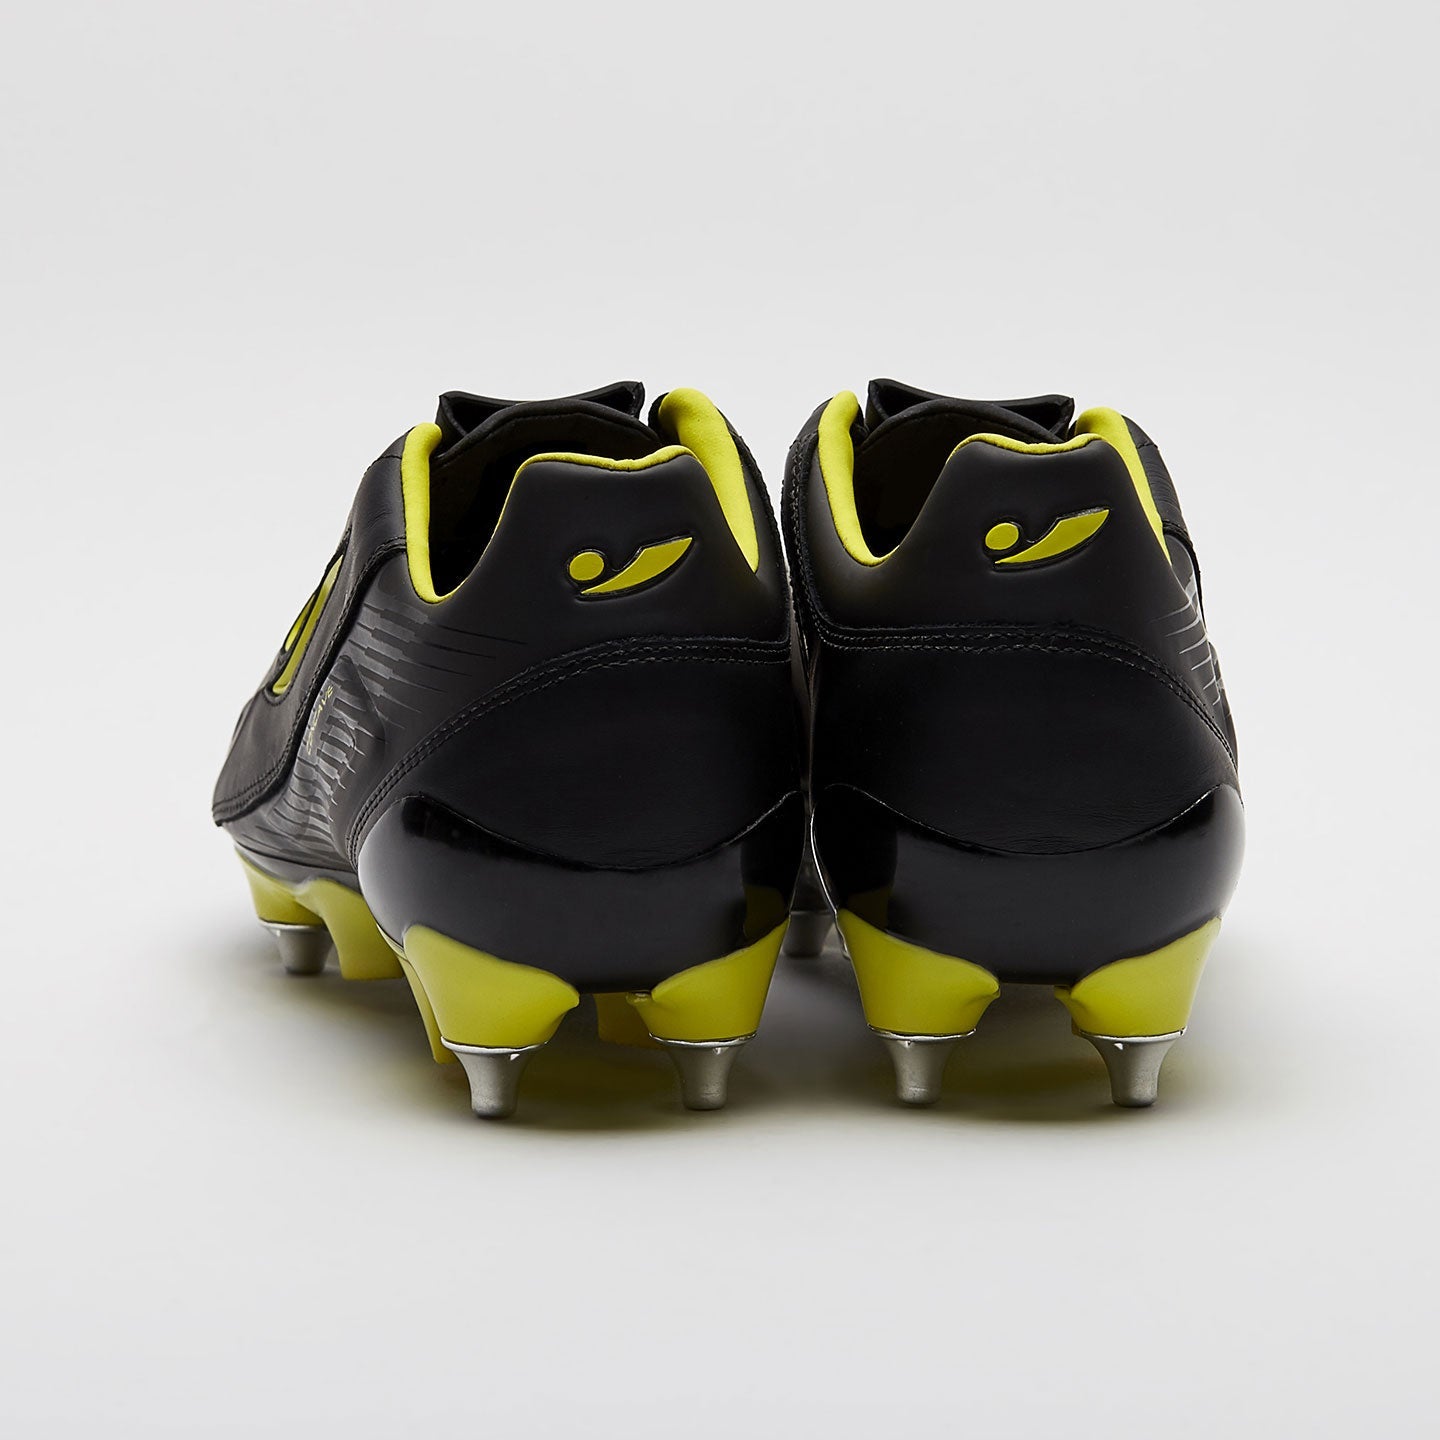 Concave Halo + Leather SG - Black/Neon Yellow